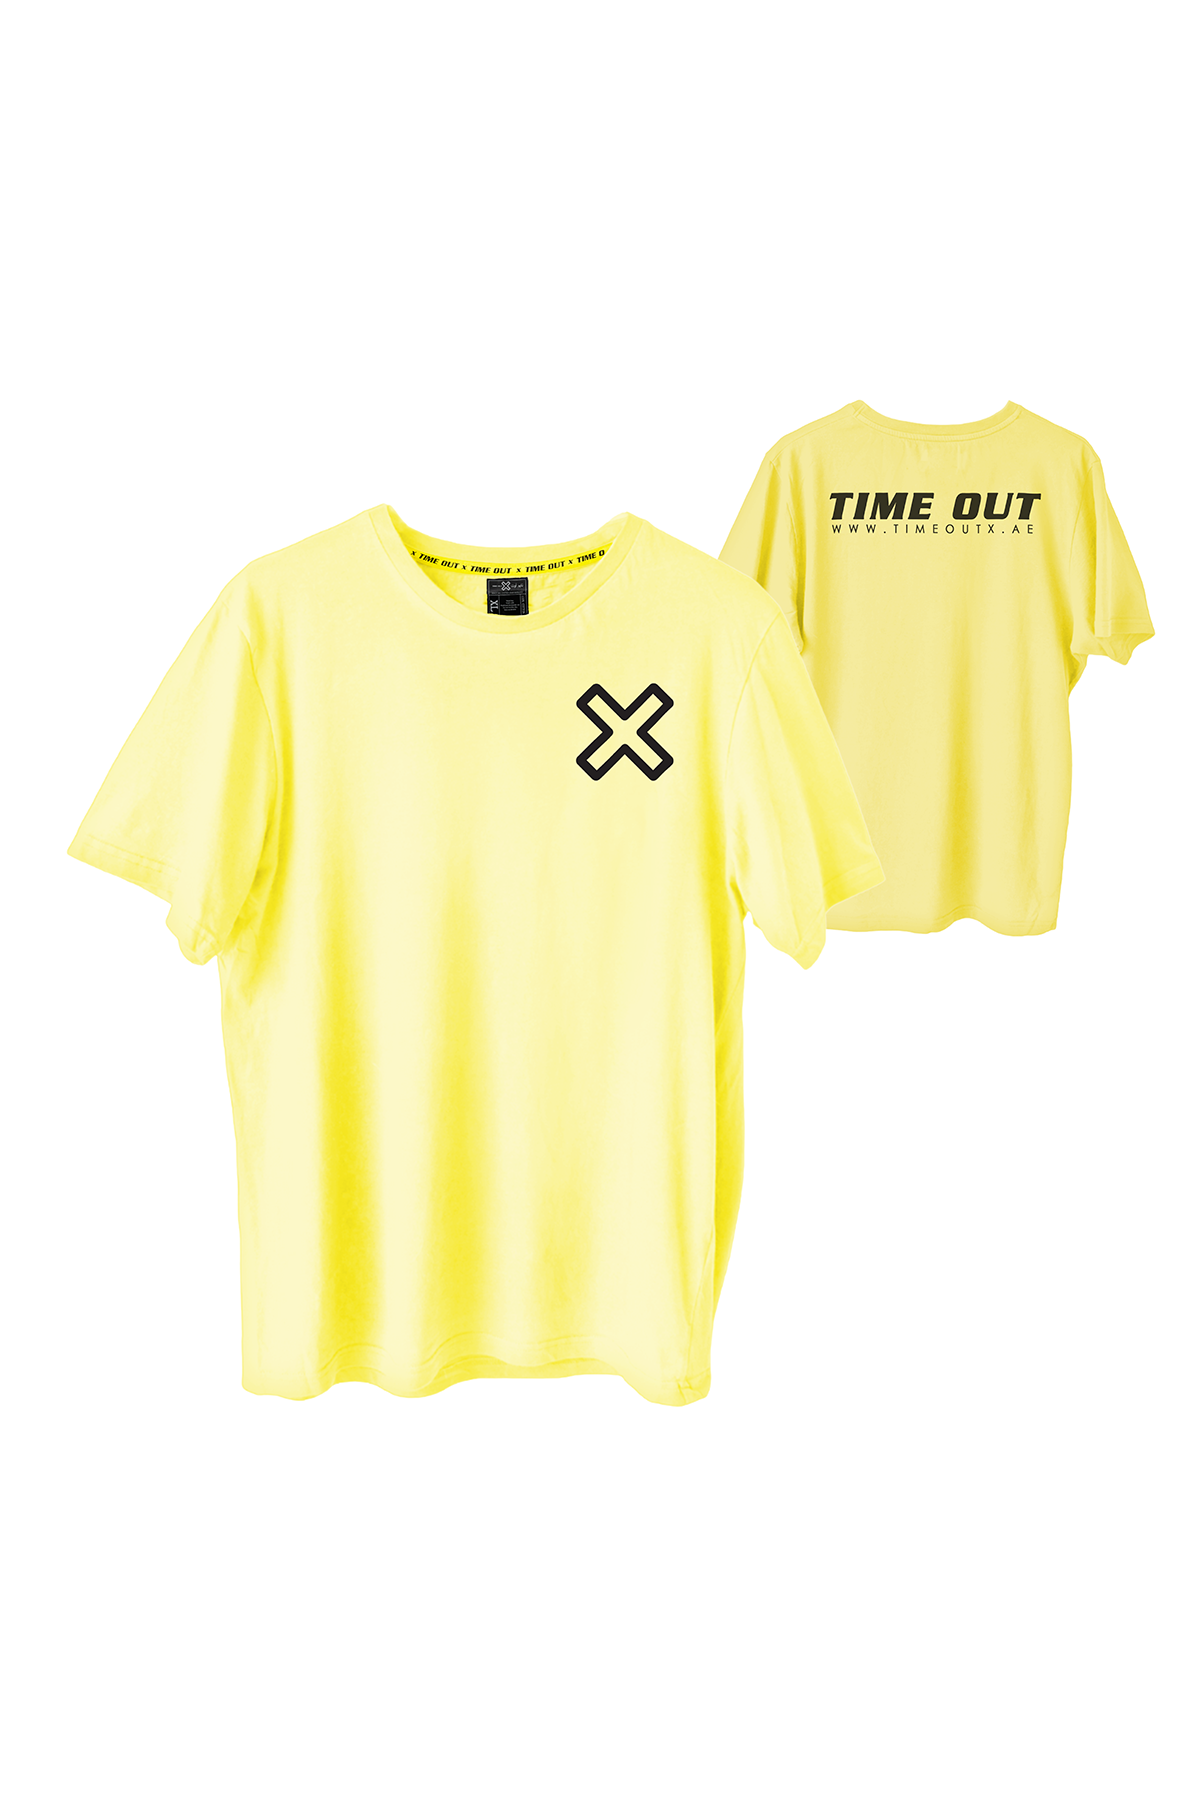 Time-Out-X-Signature-Minimalist-Cotton-Yellow-T-Shirt—Front-and-Back